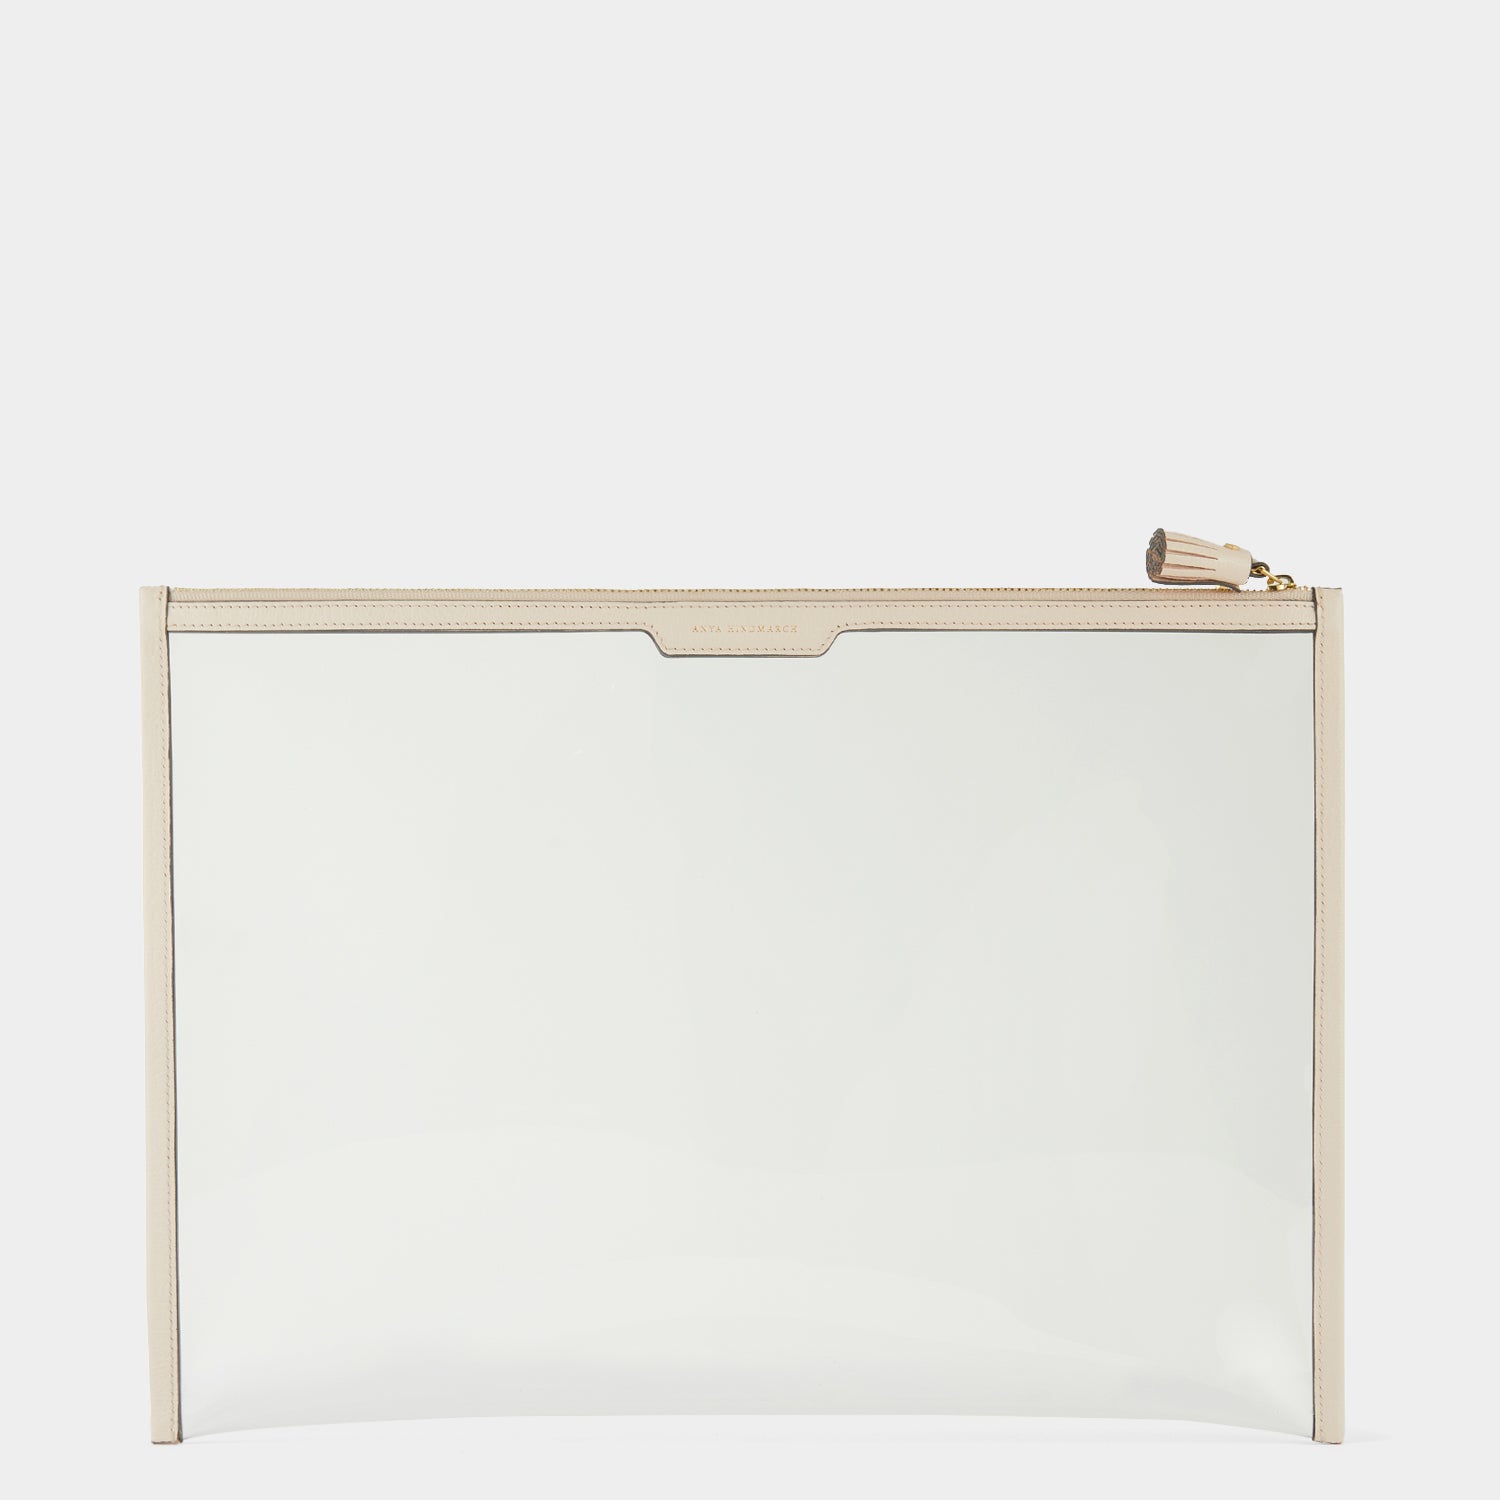 Papers Zip Sleeve -

                  
                    Capra Leather in Light Blush -
                  

                  Anya Hindmarch UK
